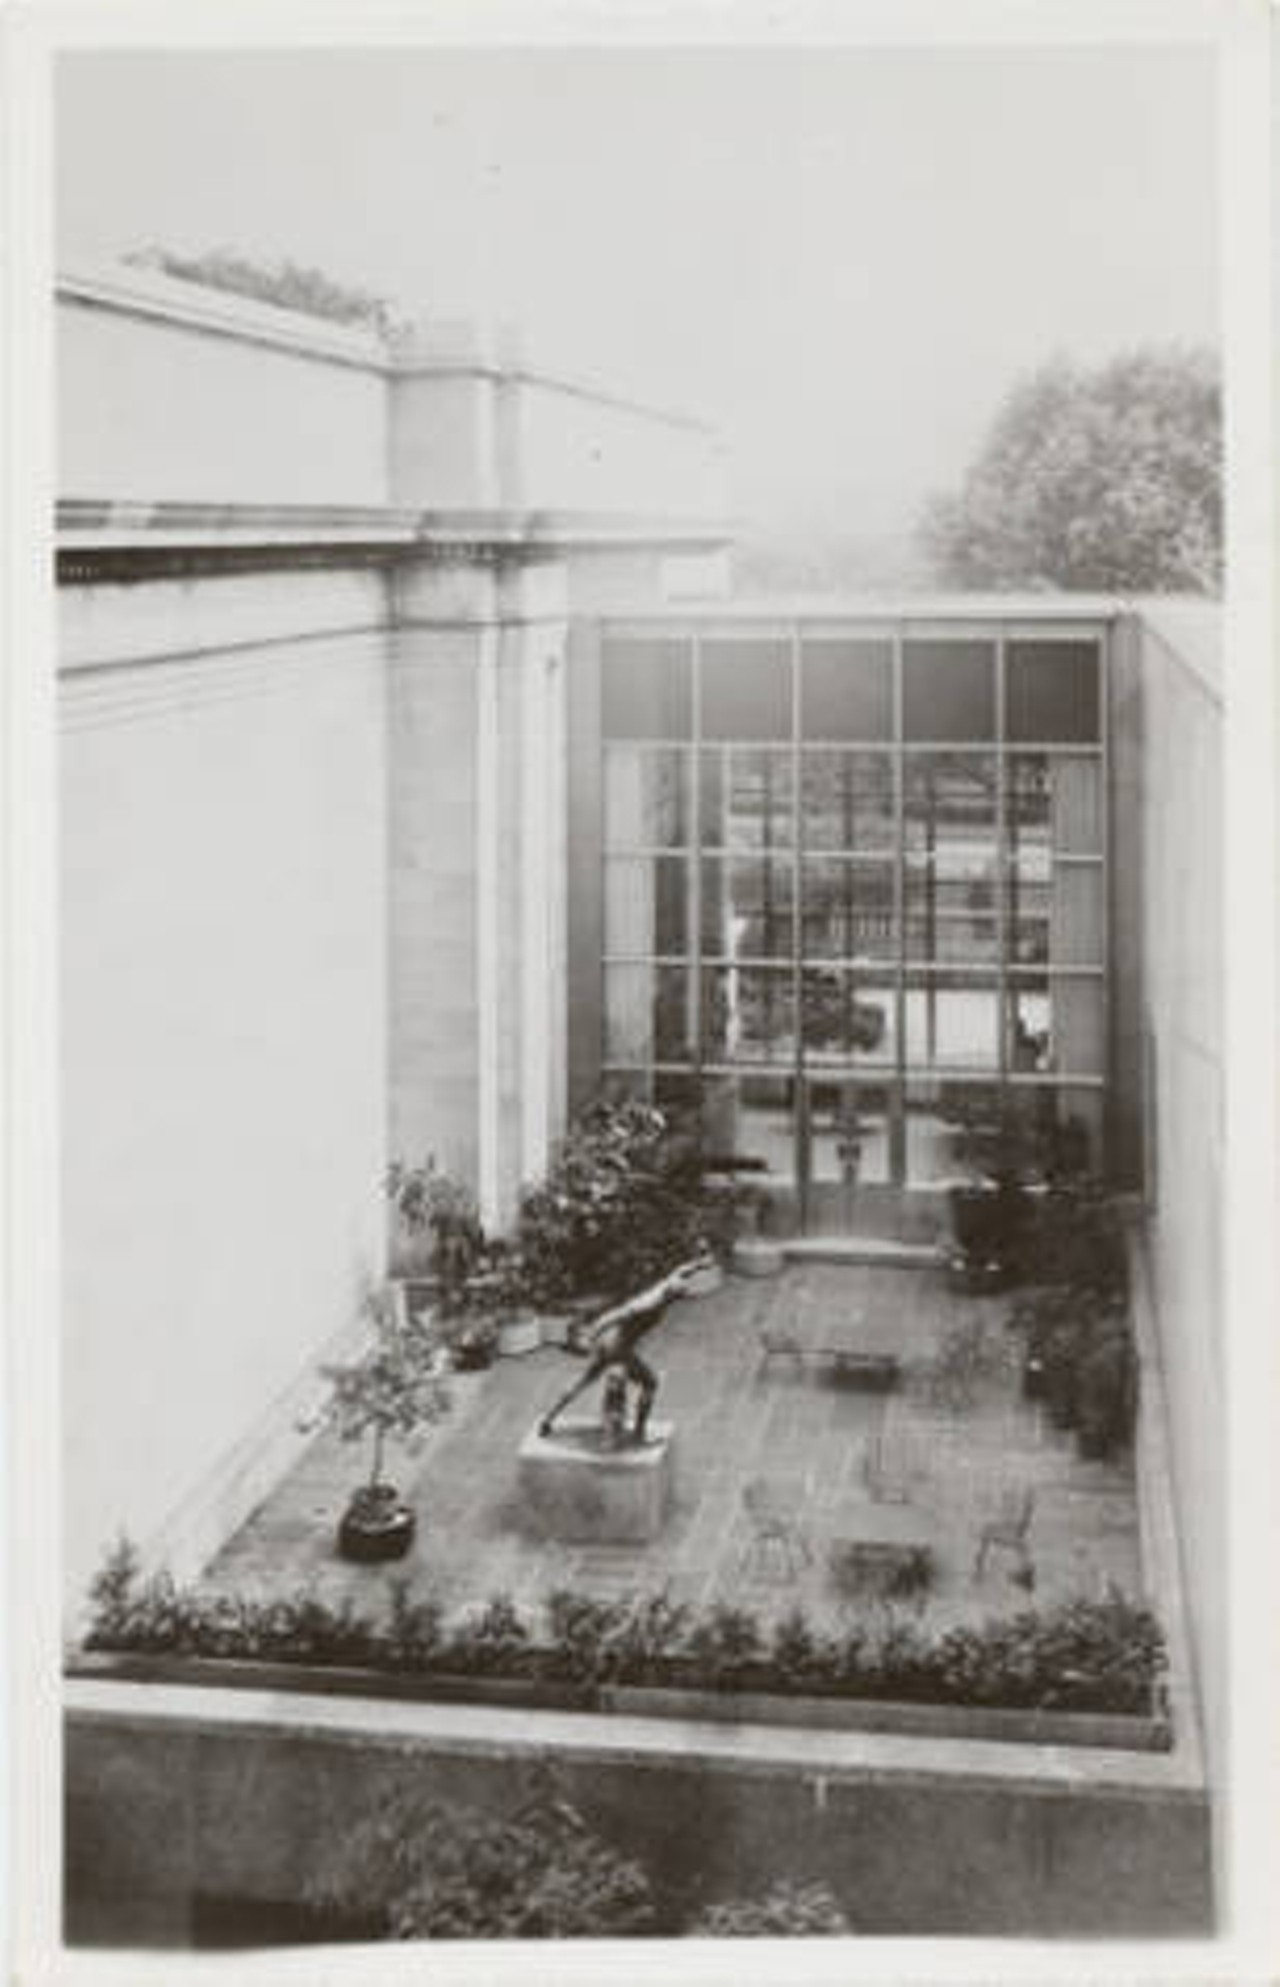 Classical Terrace, The Cleveland Museum of Art. c. 1960